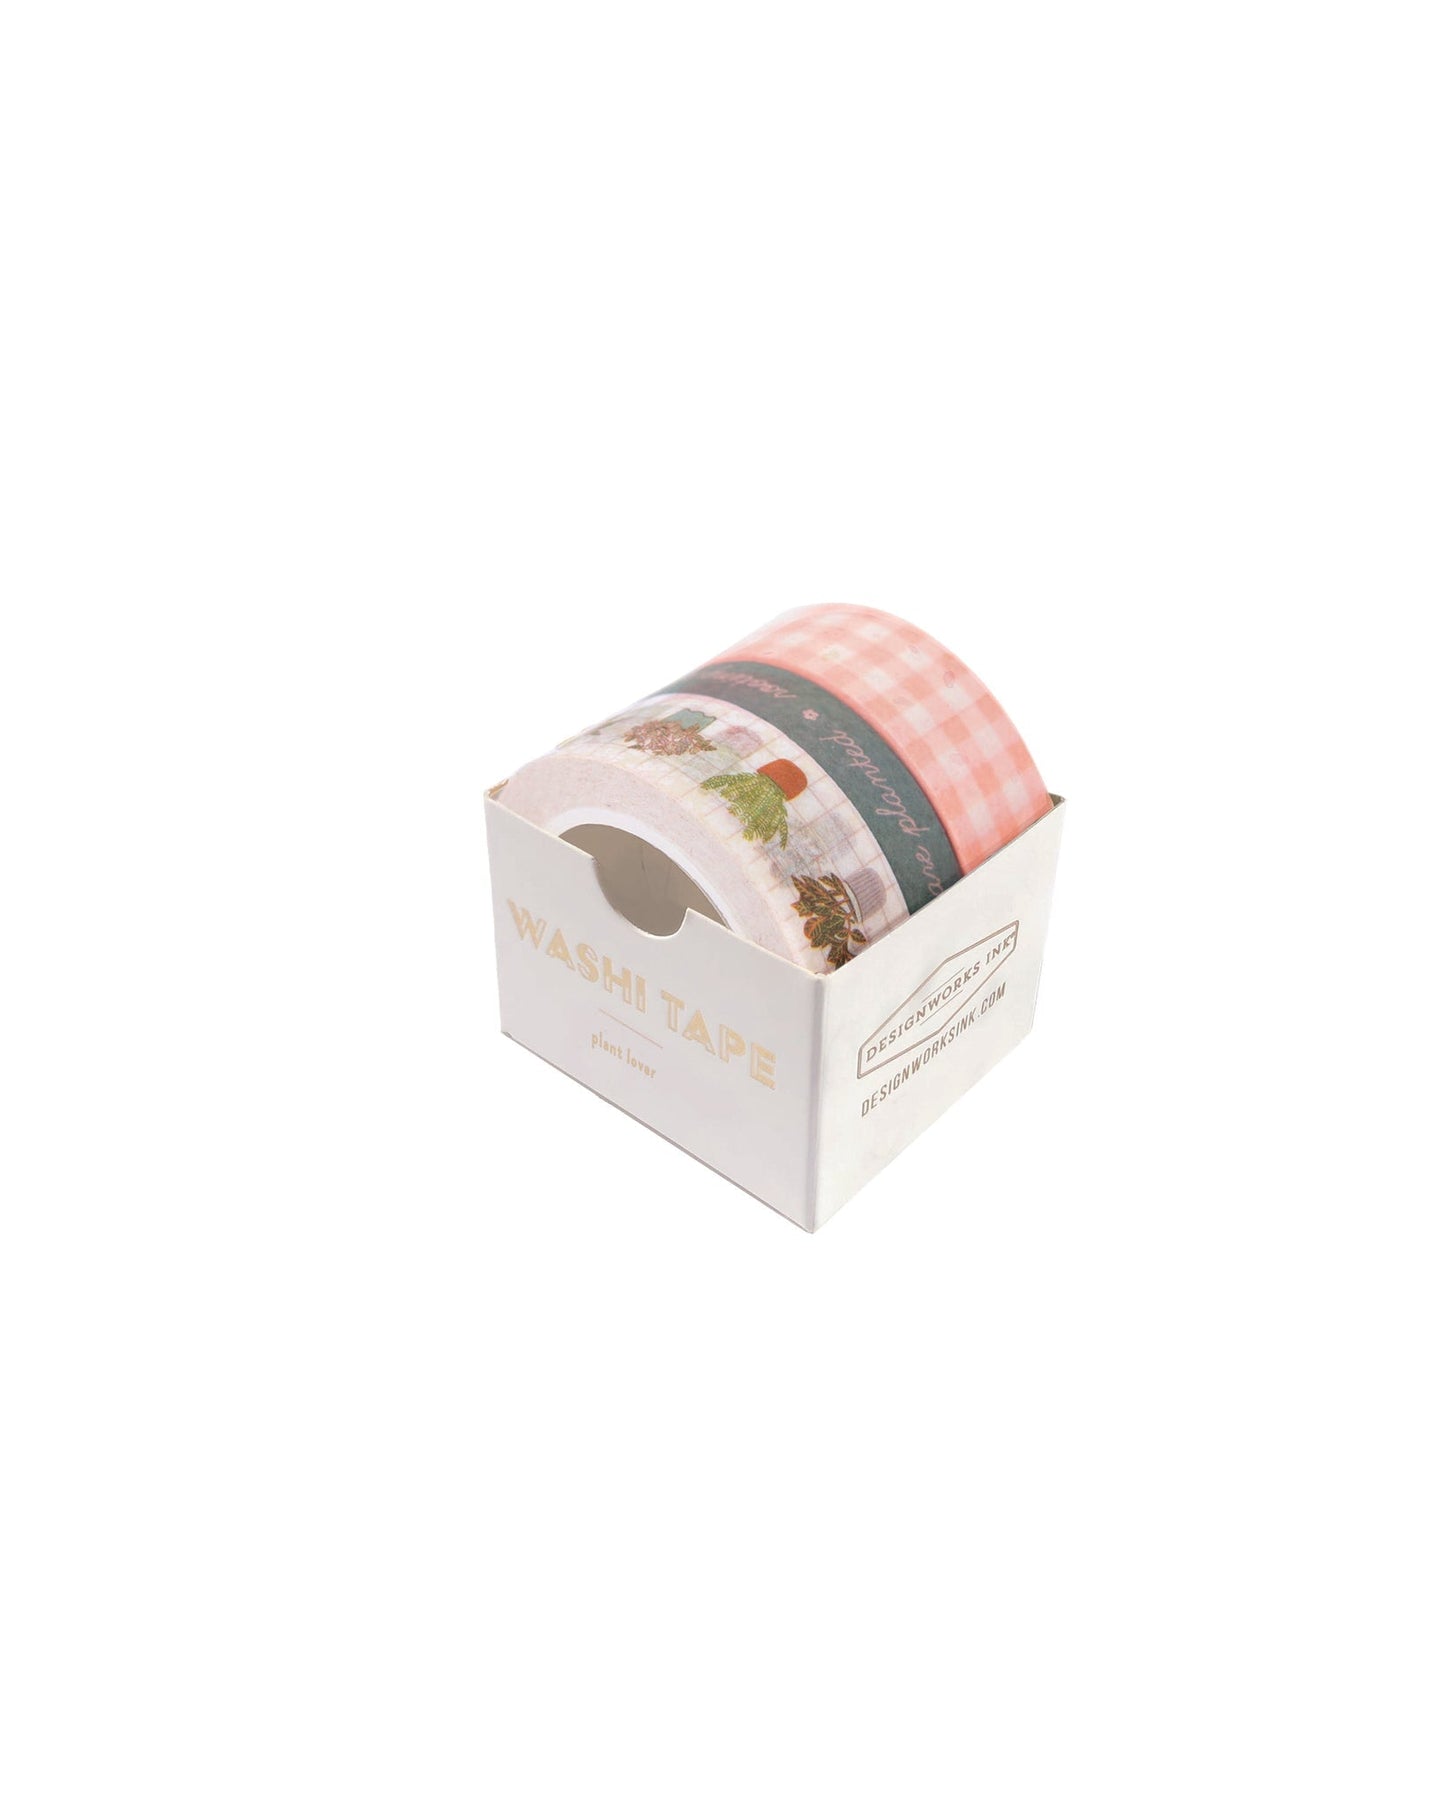 Trees Washi Tape. Planner Decoration. Nature Washi Tape. Cute Washi Tape.  Masking Tape. Planner Supplies. Craft Tape. Flowers Washi Tape. ·  Magsterarts · Online Store Powered by Storenvy